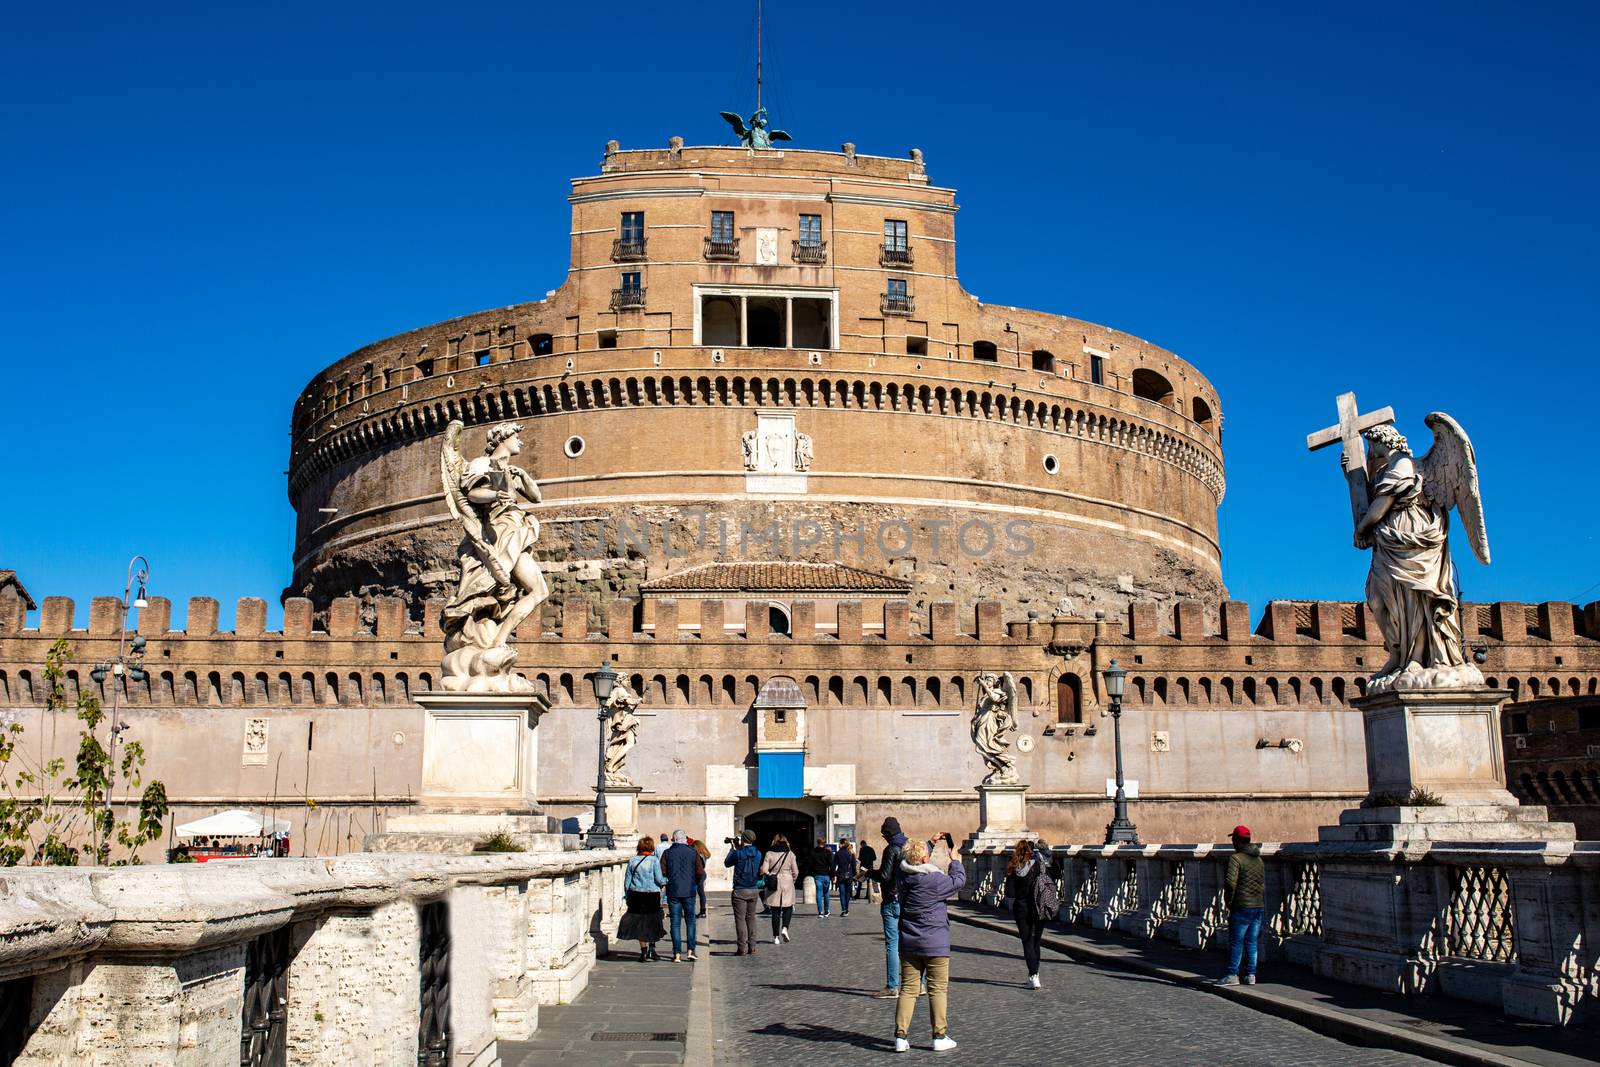 Frontal view of the Castel Sant'Angelo against the blue sky in Rome, Italy. tourists walk on the bridge